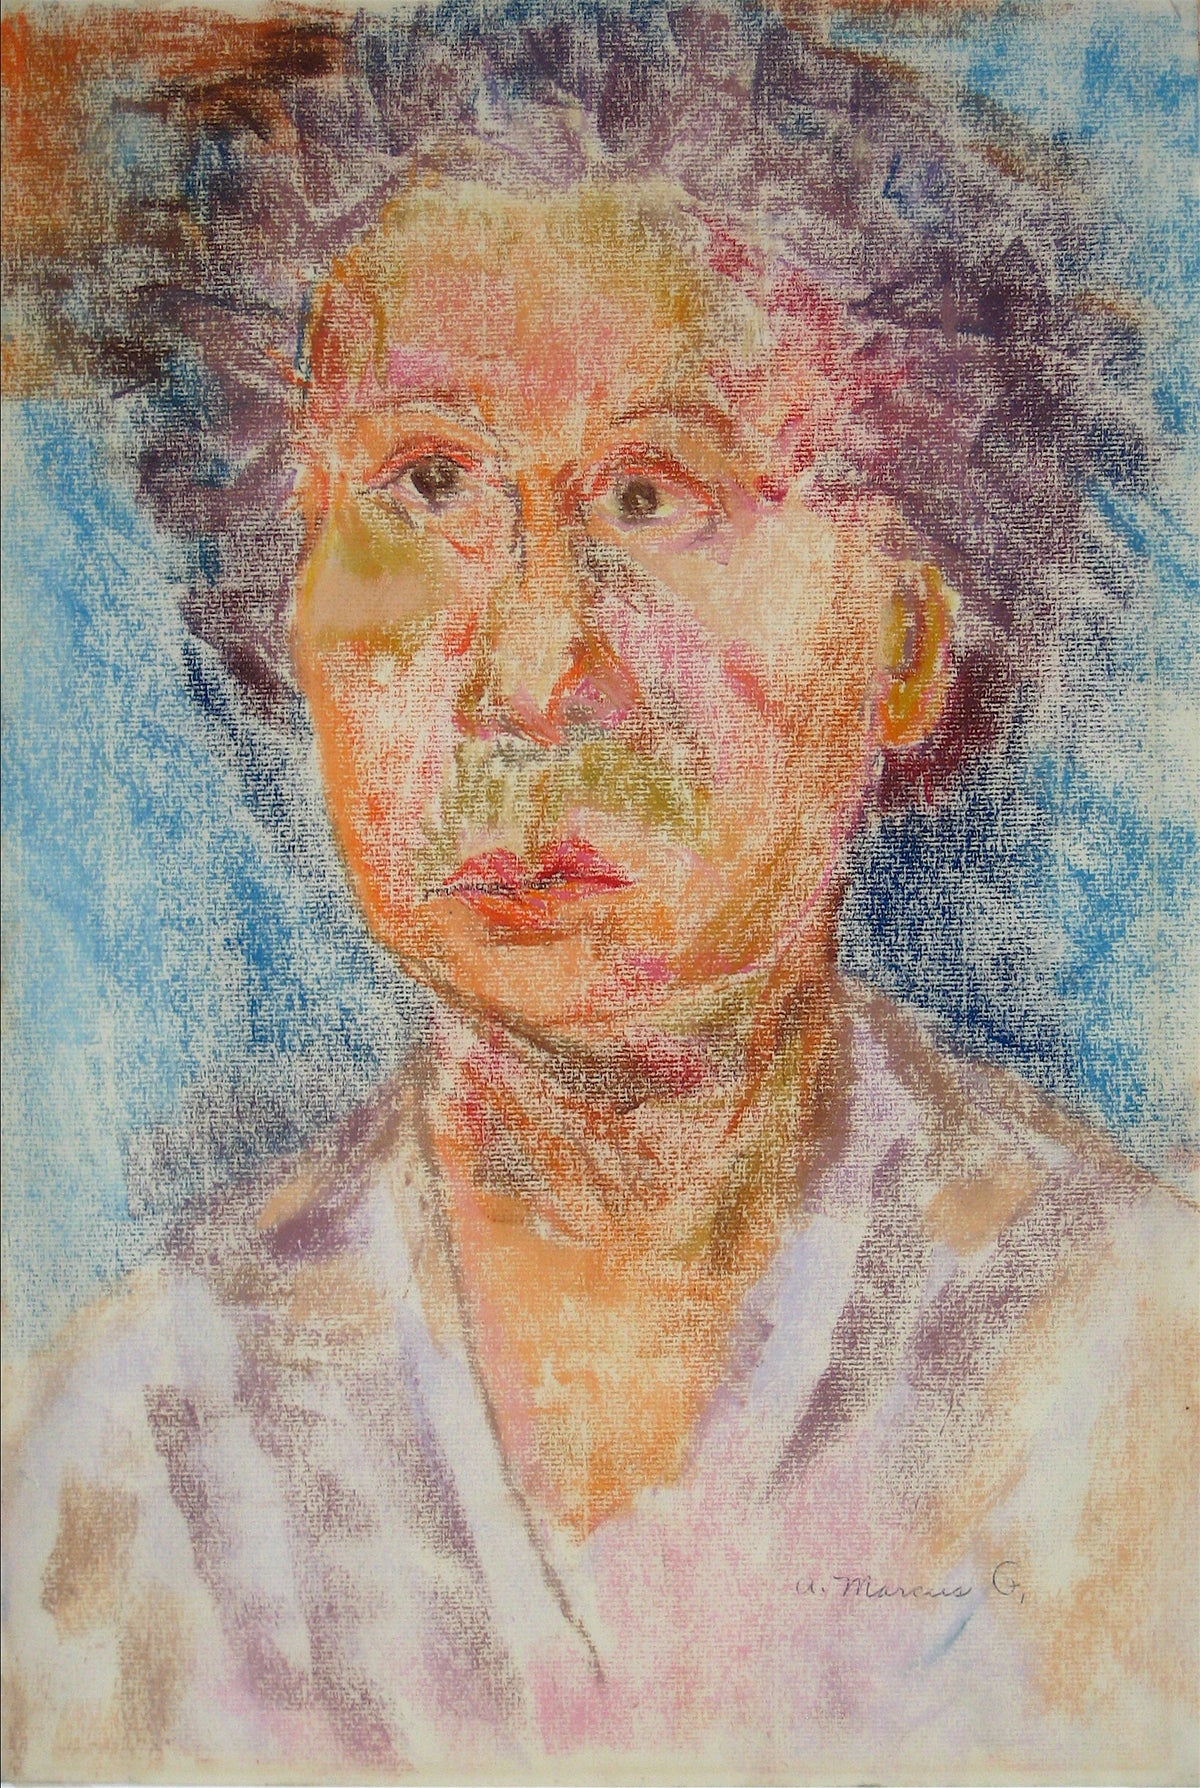 &lt;i&gt;Pearl Tofel Shortly After Tofel&#39;s Death&lt;/i&gt;&lt;br&gt;Pastel, 1950-60s&lt;br&gt;&lt;br&gt;#15278